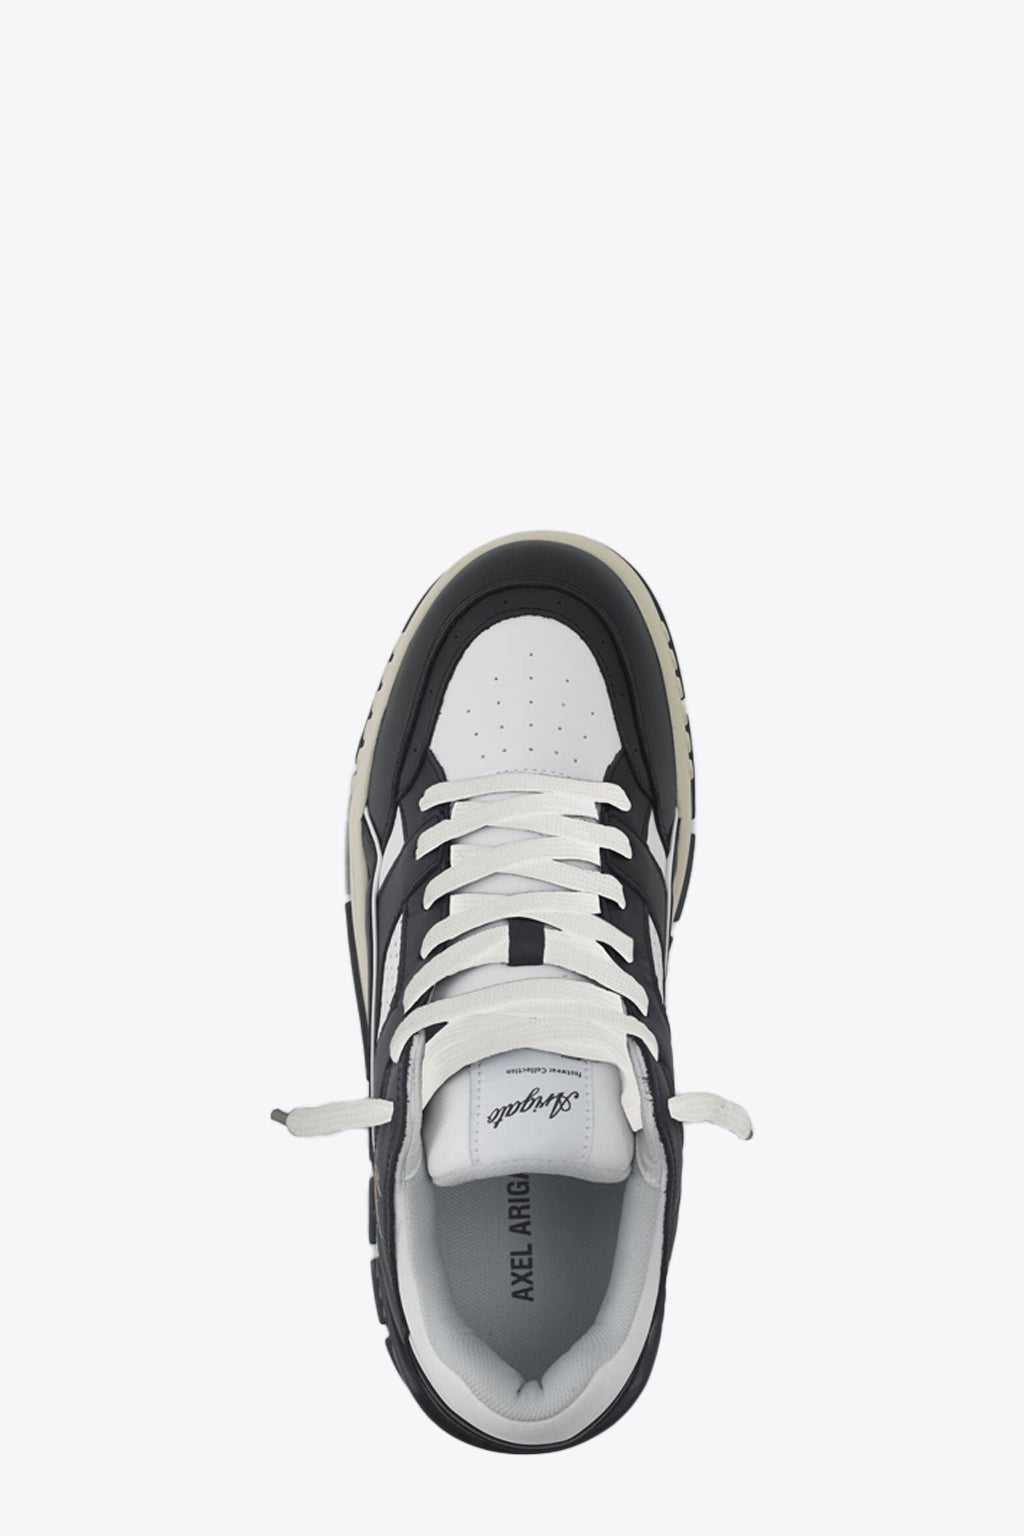 alt-image__Black-and-white-leather-lace-up-low-sneaker---Area-Lo-sneaker